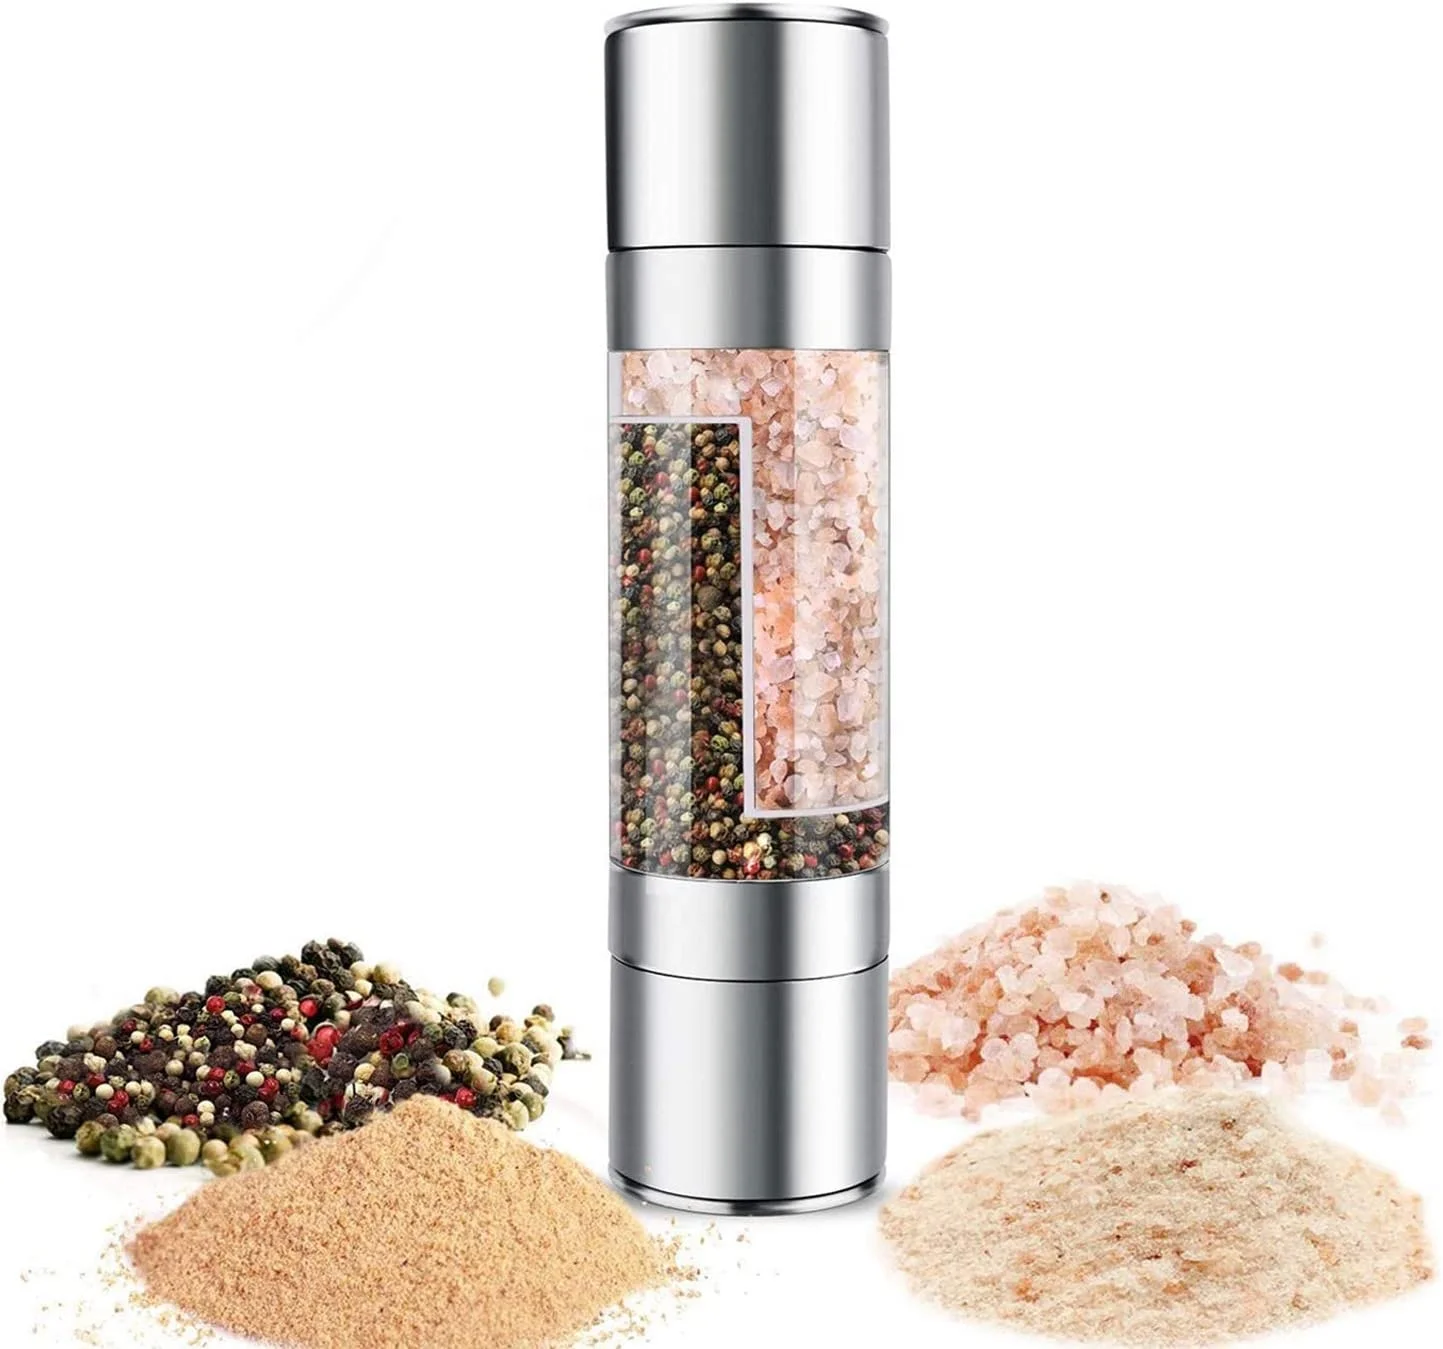 

Amazon Hot 2 in1manual Salt and Pepper Grinder Set hight Stainless Steel Adjustable coarseness salt and pepper mill